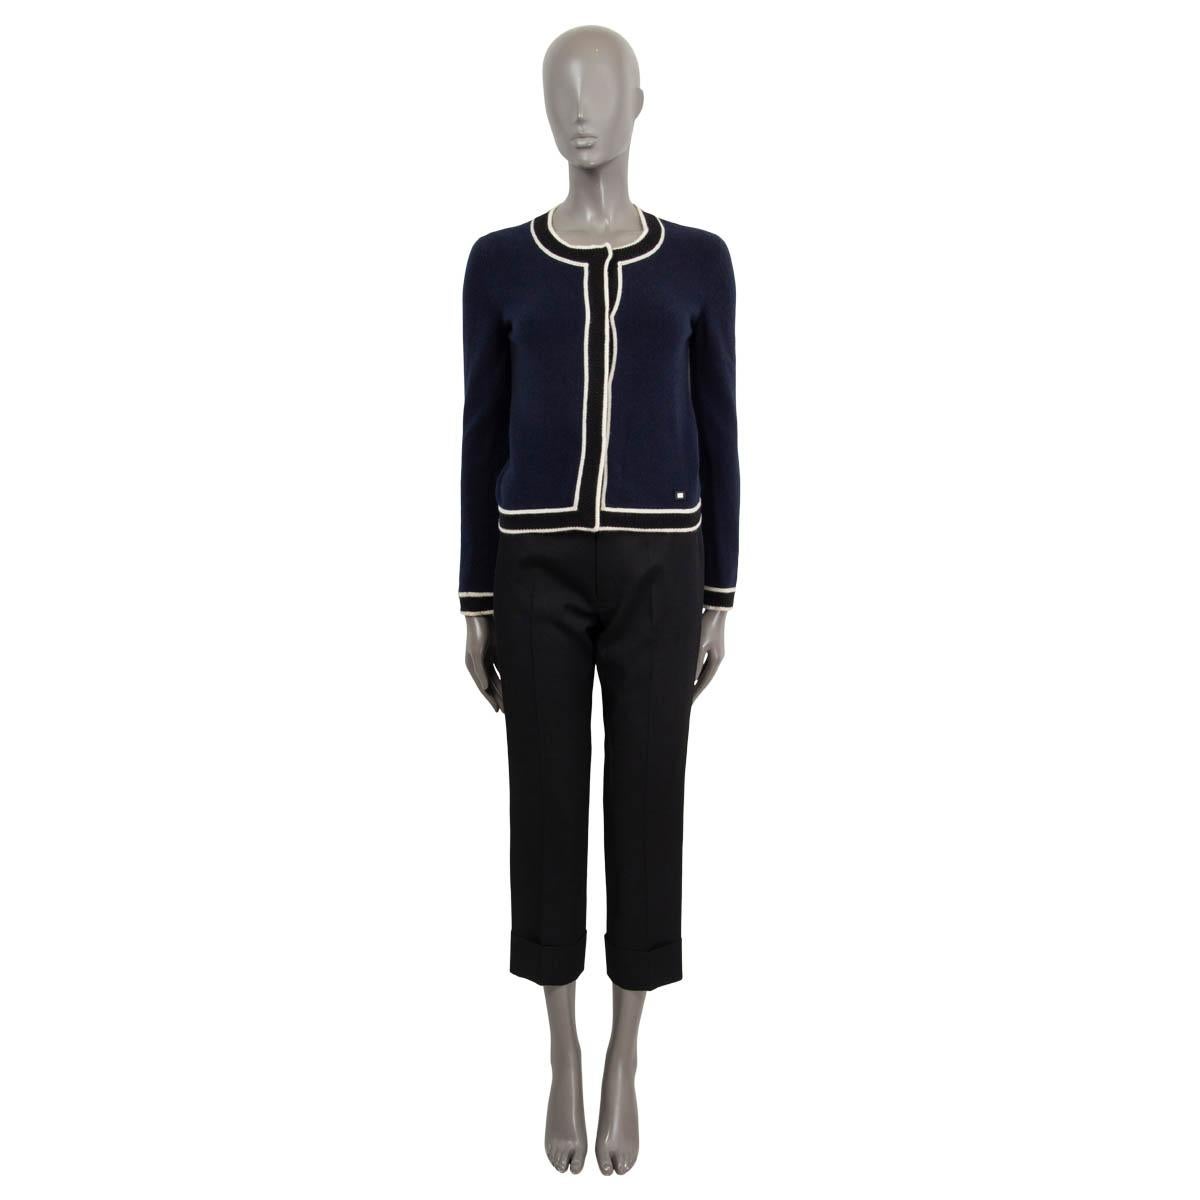 100% authentic Chanel round-neck cardigan in navy blue cashmere (100%) with contrast trim in black and white. Closes with concealed buttons on the front. Has been worn and is in excellent condition.

2002 Resort

Measurements
Model	Chanel02C
Tag